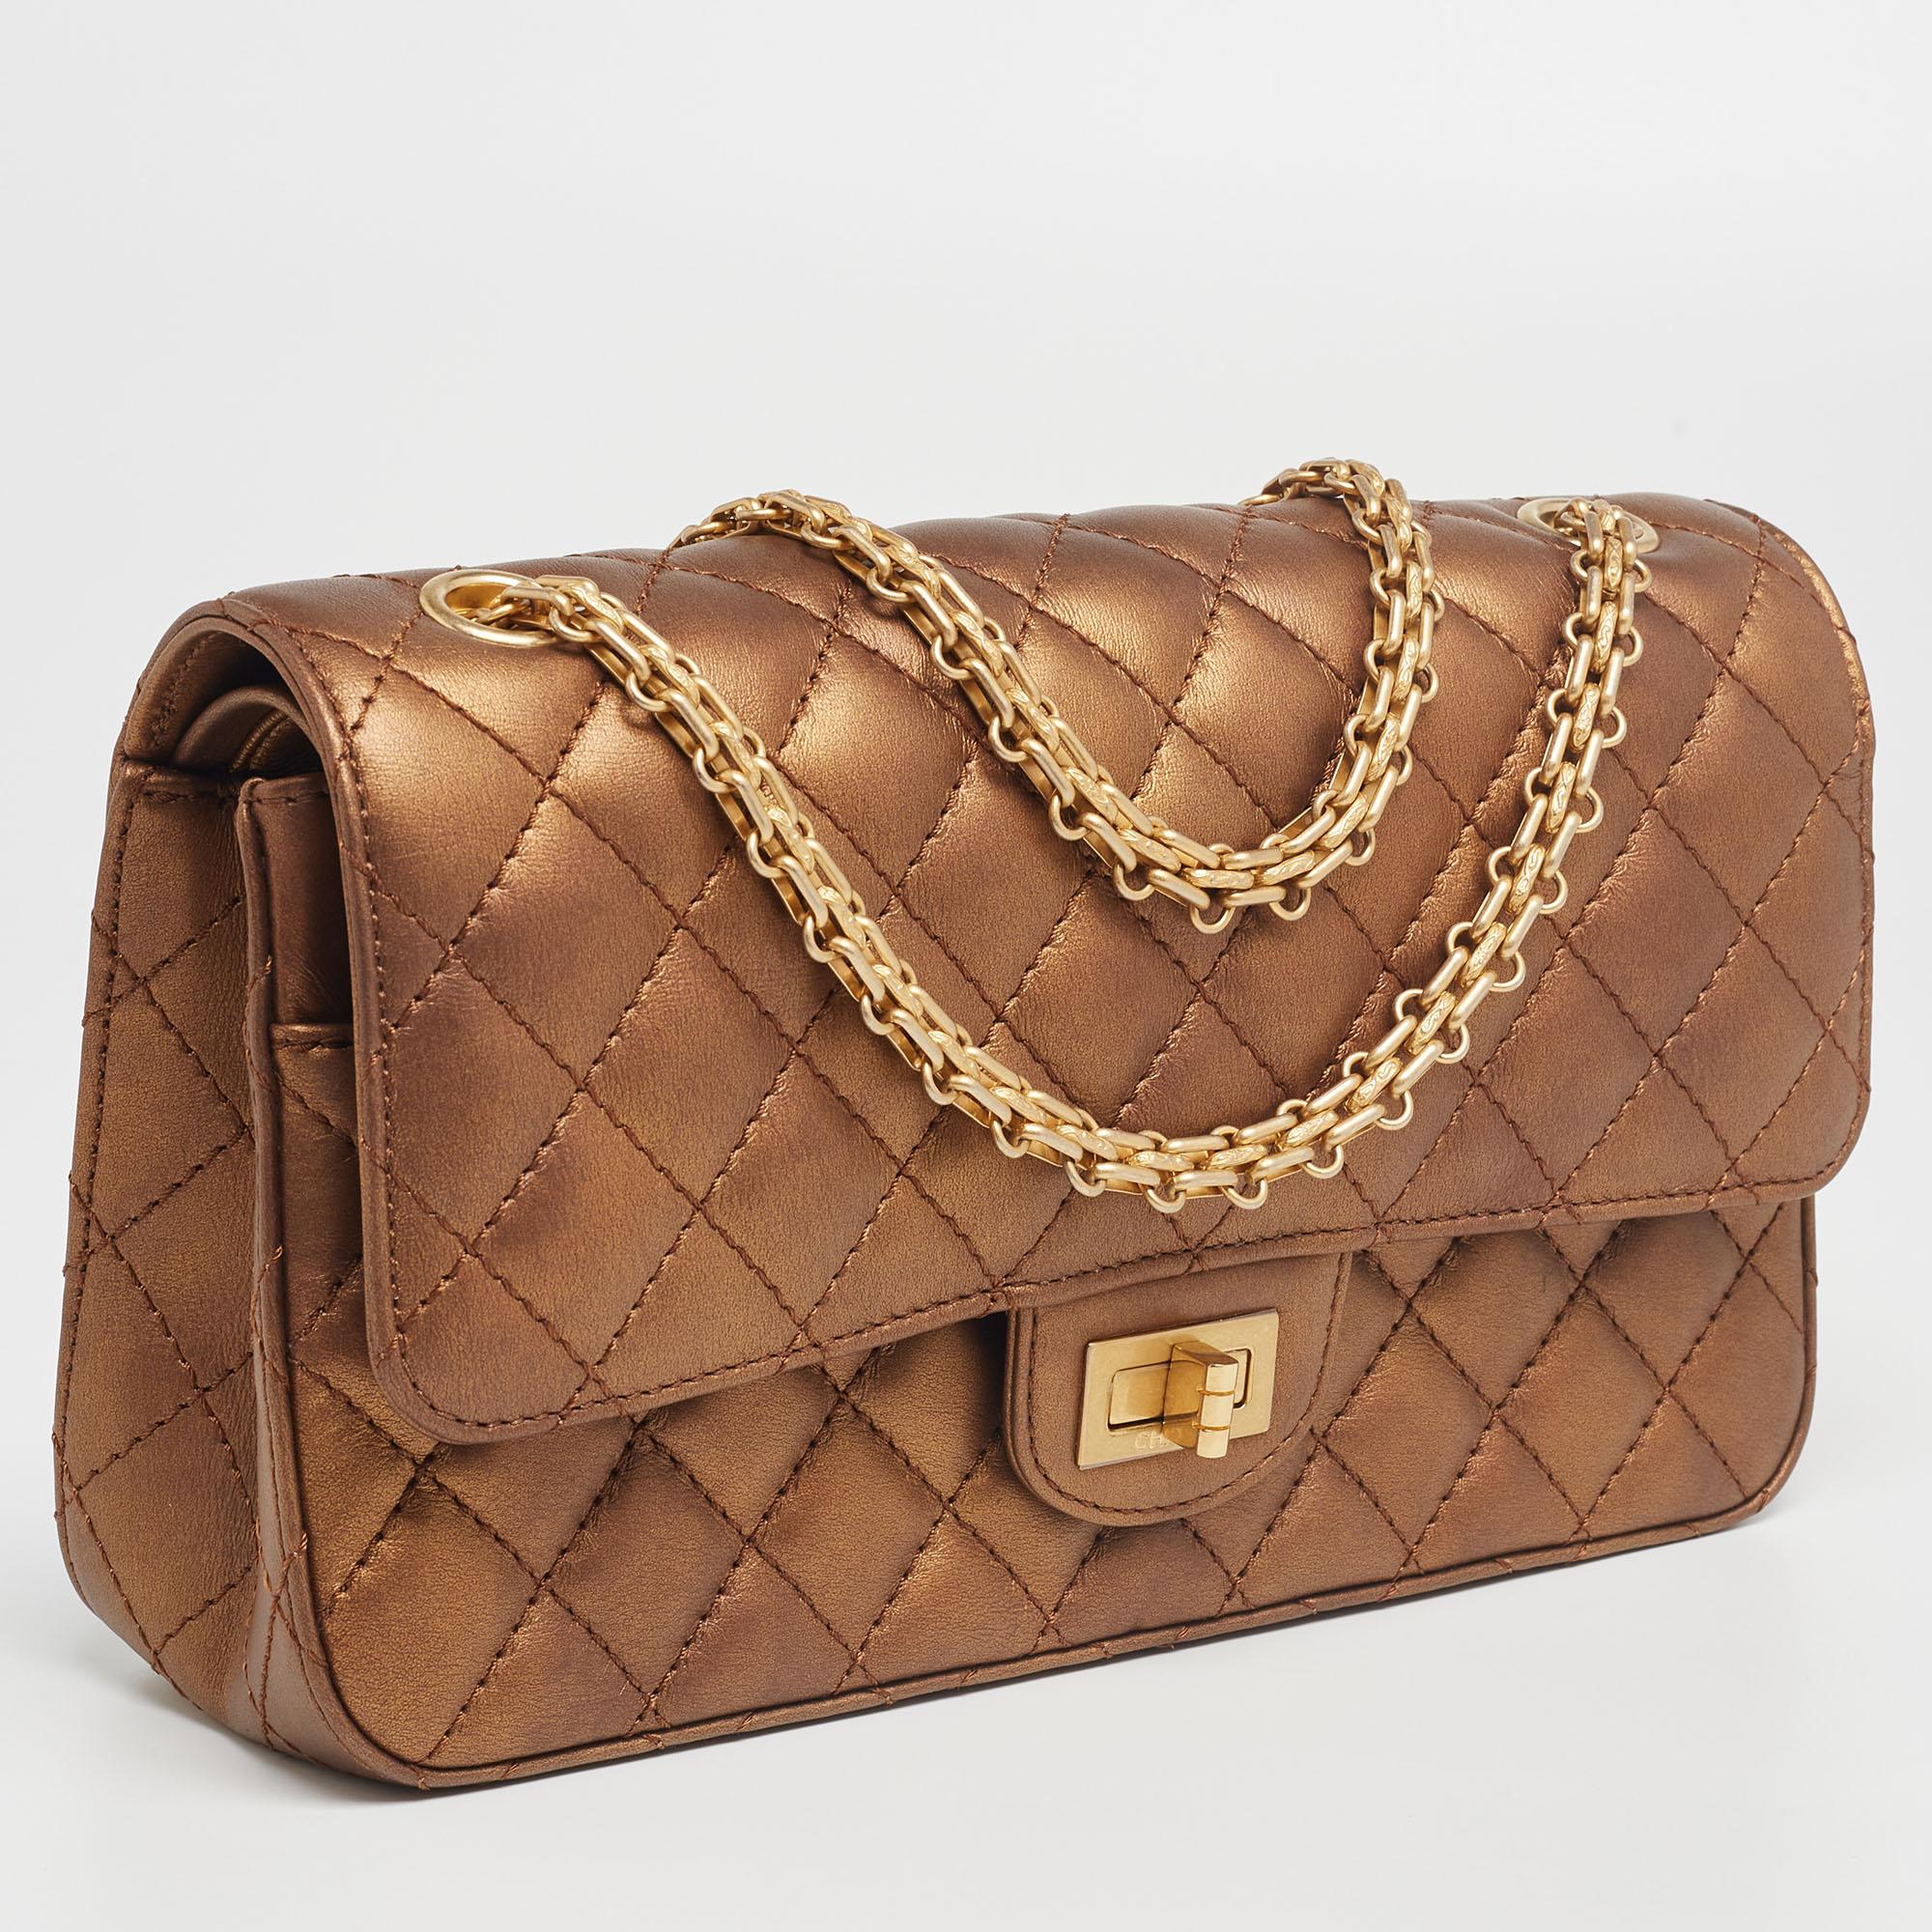 Chanel Metallic Bronze Quilted Leather 2.55 Reissue Classic 225 Flap Bag 2